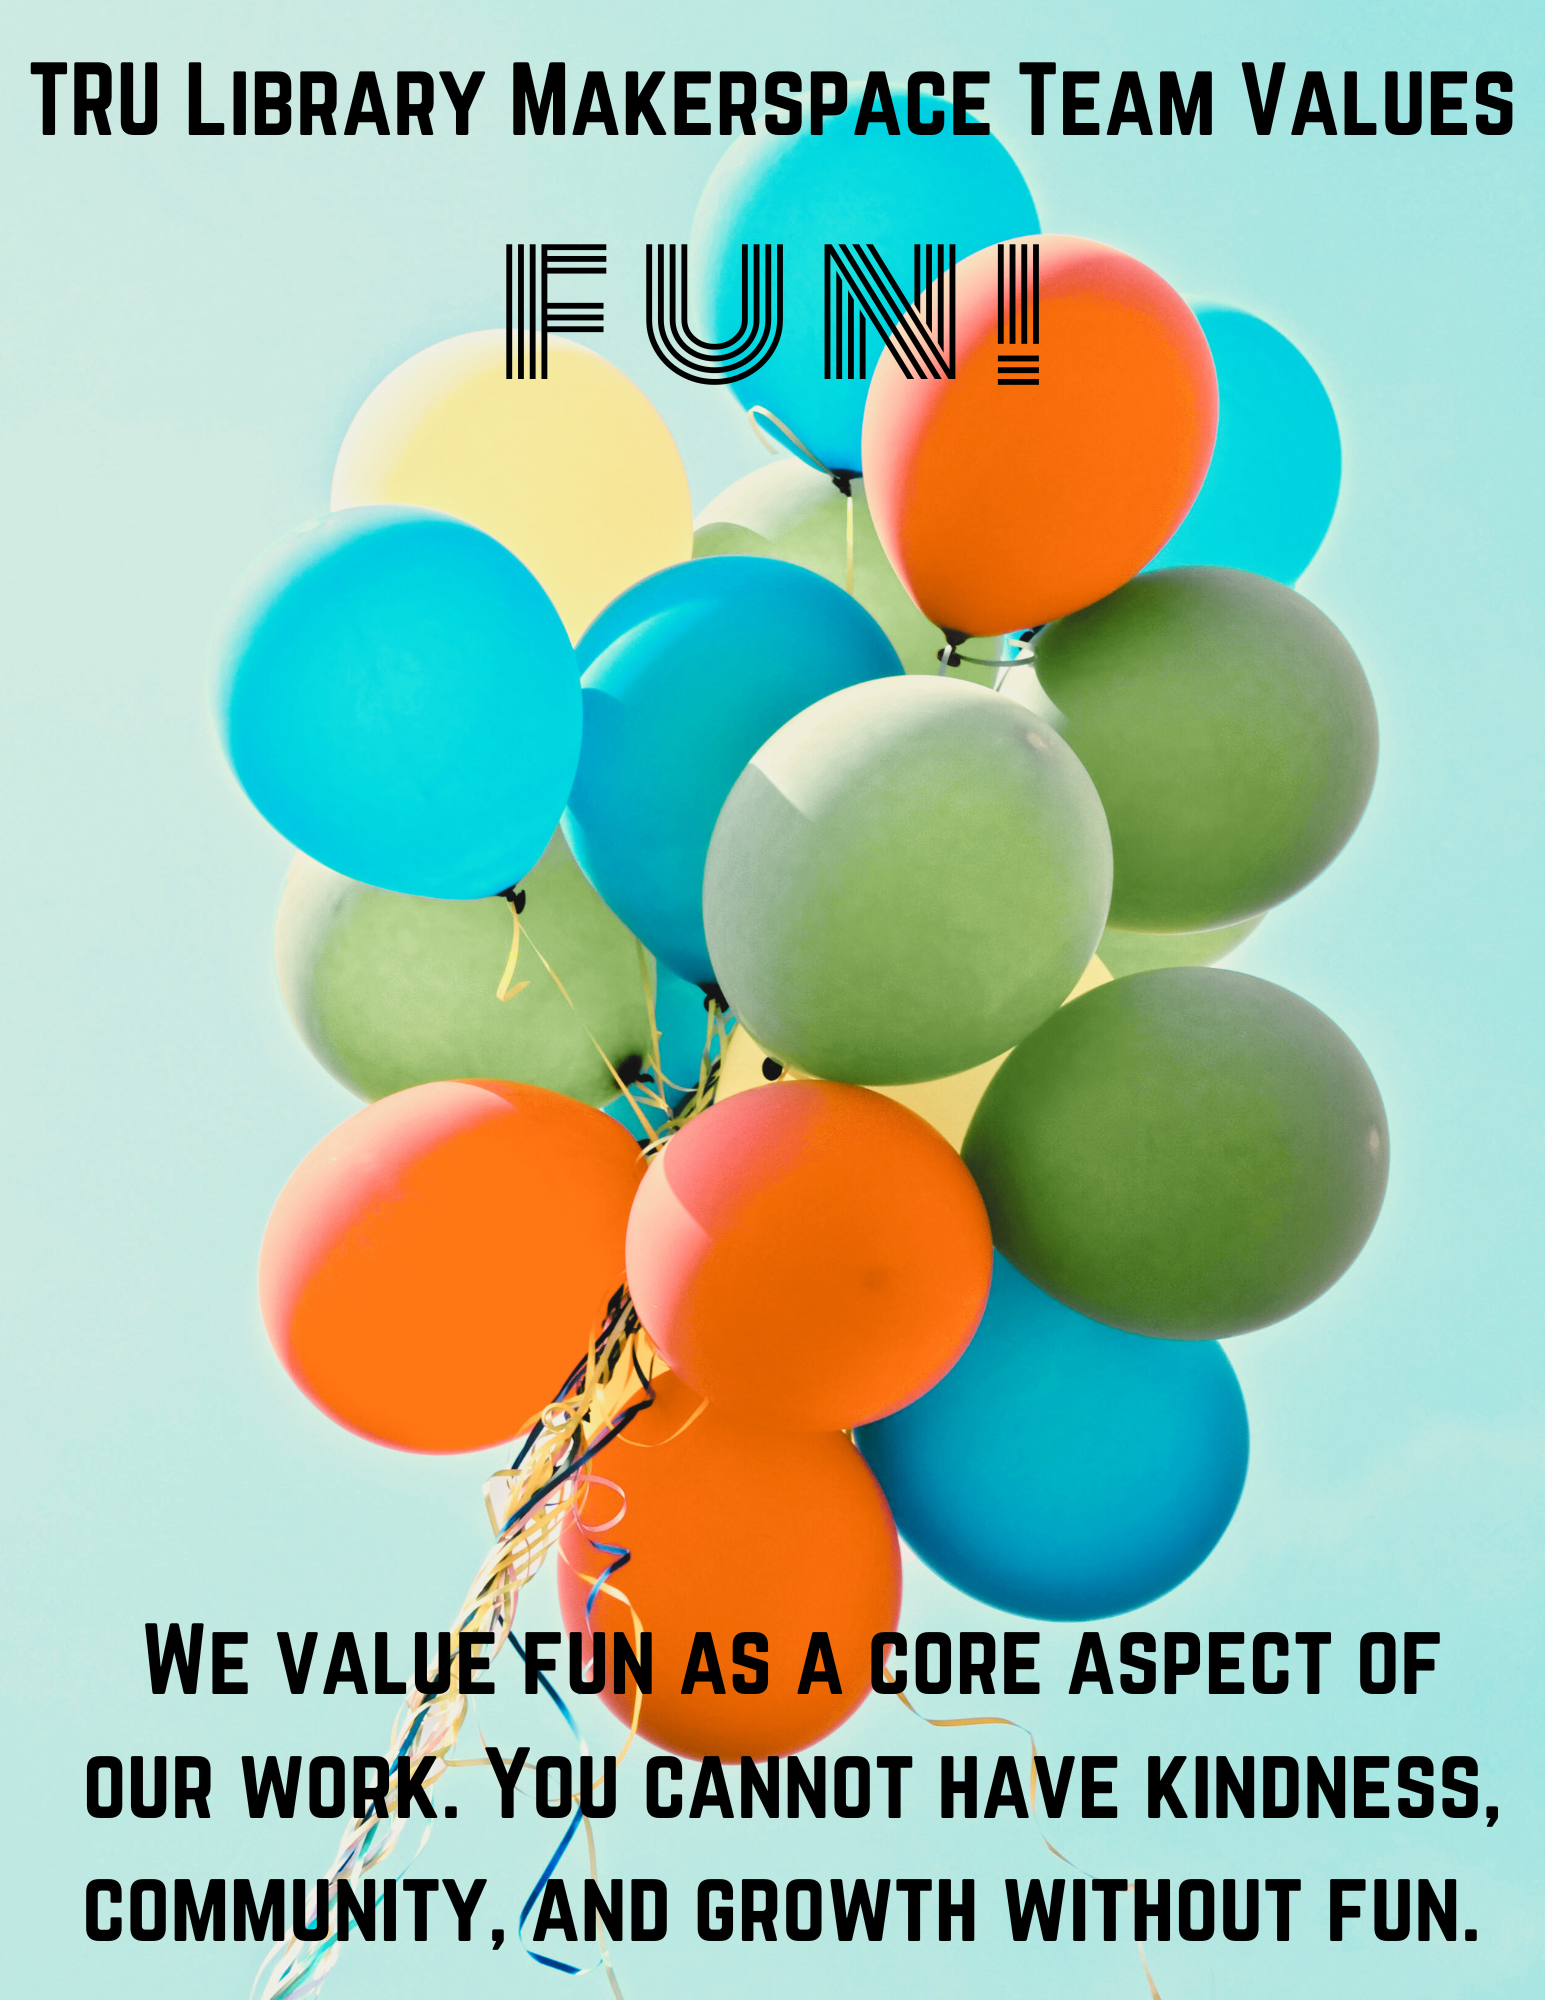 Fun: We value fun as a core aspect of our work and the philosophy/pedagogy of the Makerspace. You cannot have kindness, community, and growth without fun.